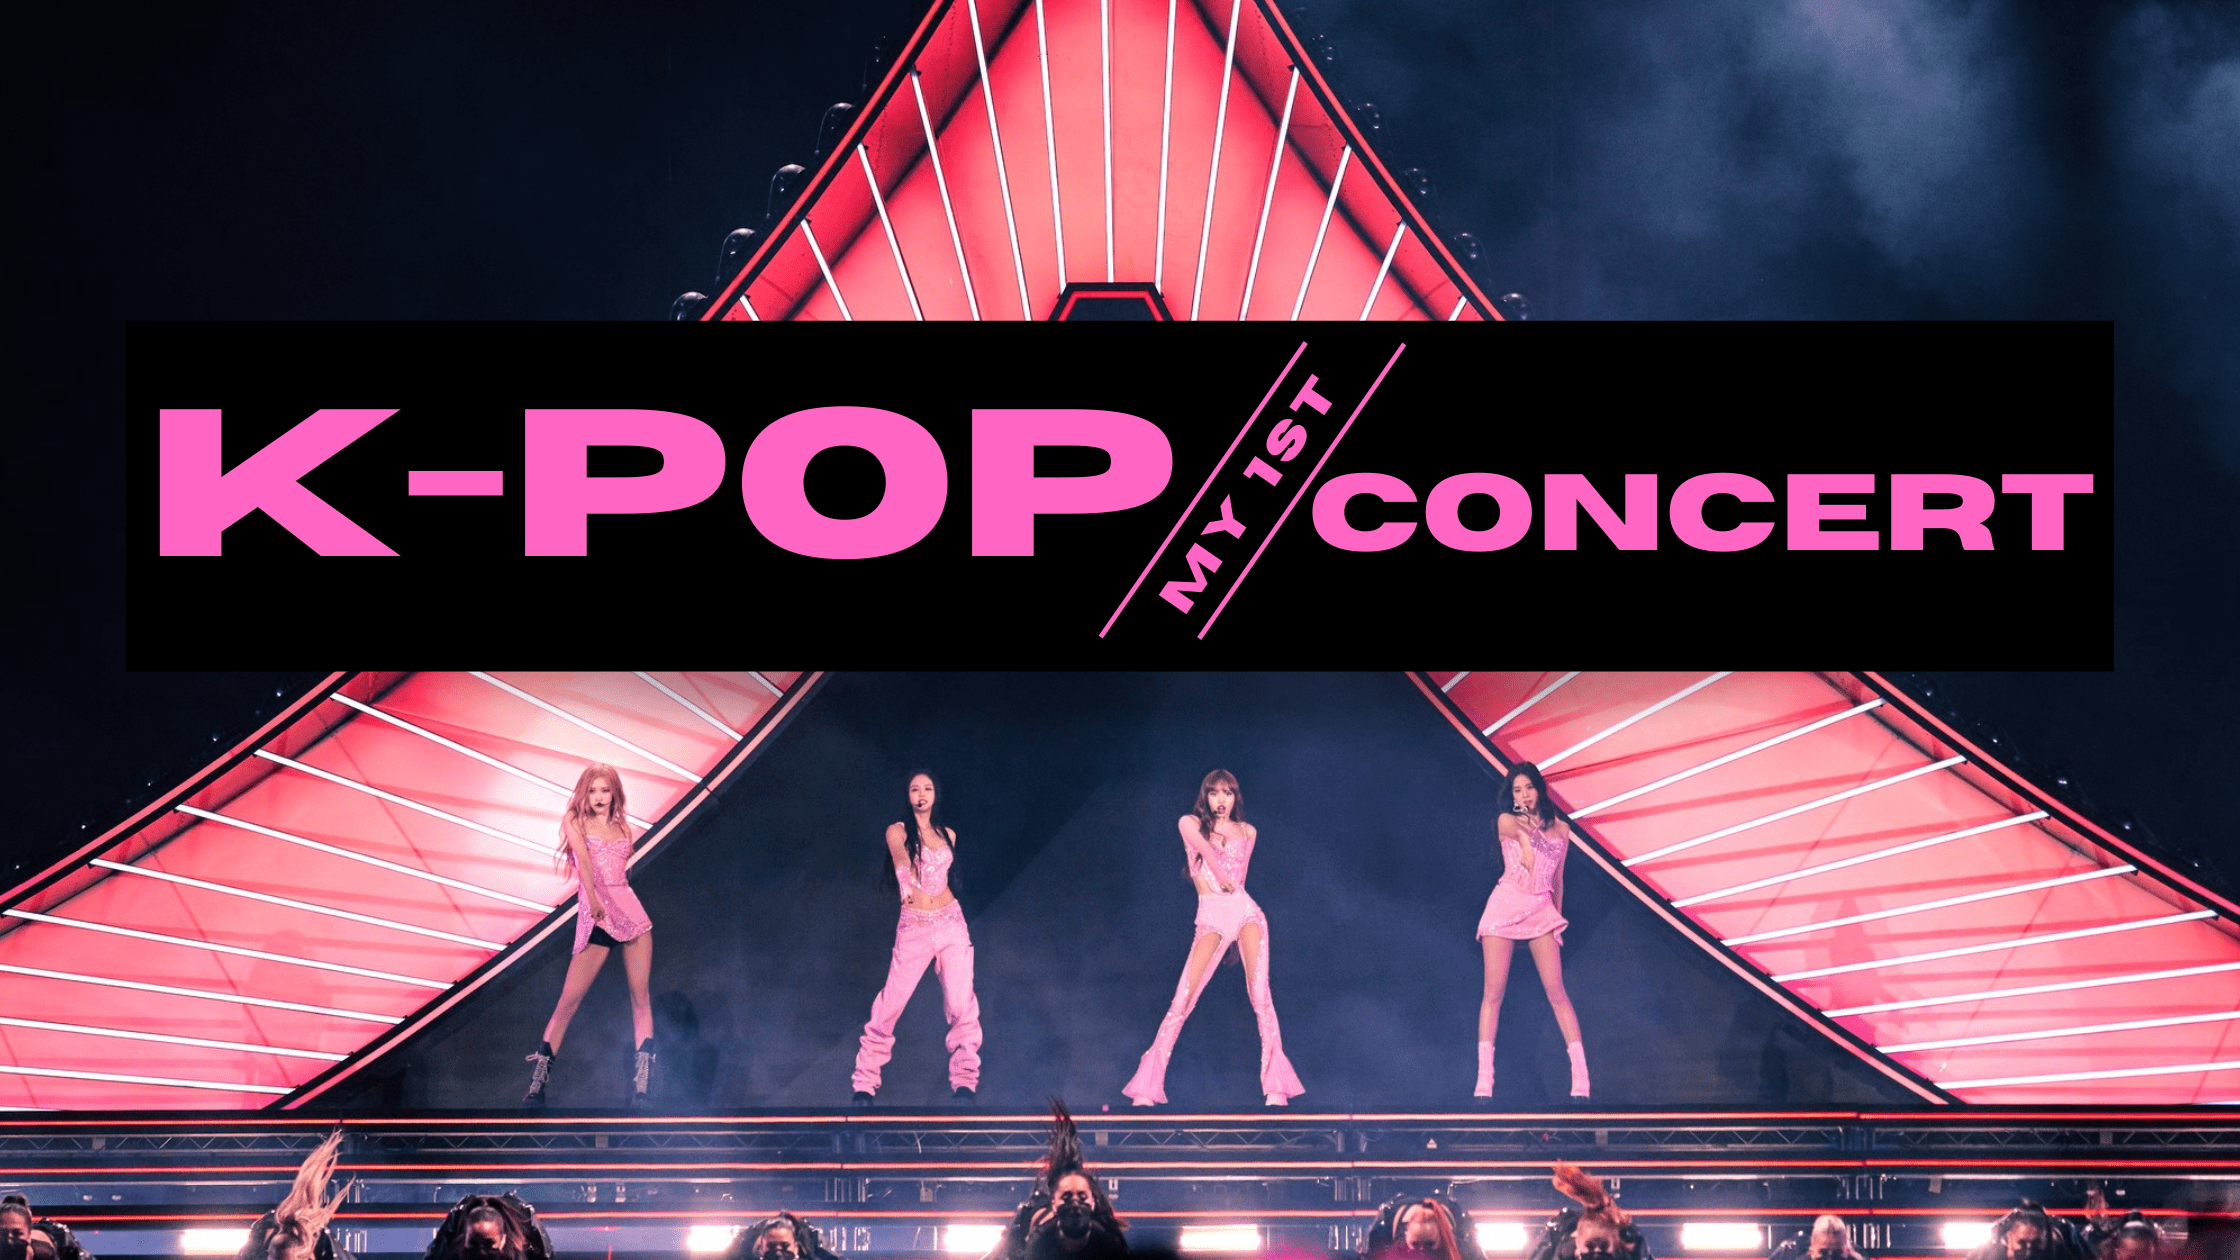 Rose, Jennie, Lisa, and Jisoo of Blackpink perform on stage in pink outfits